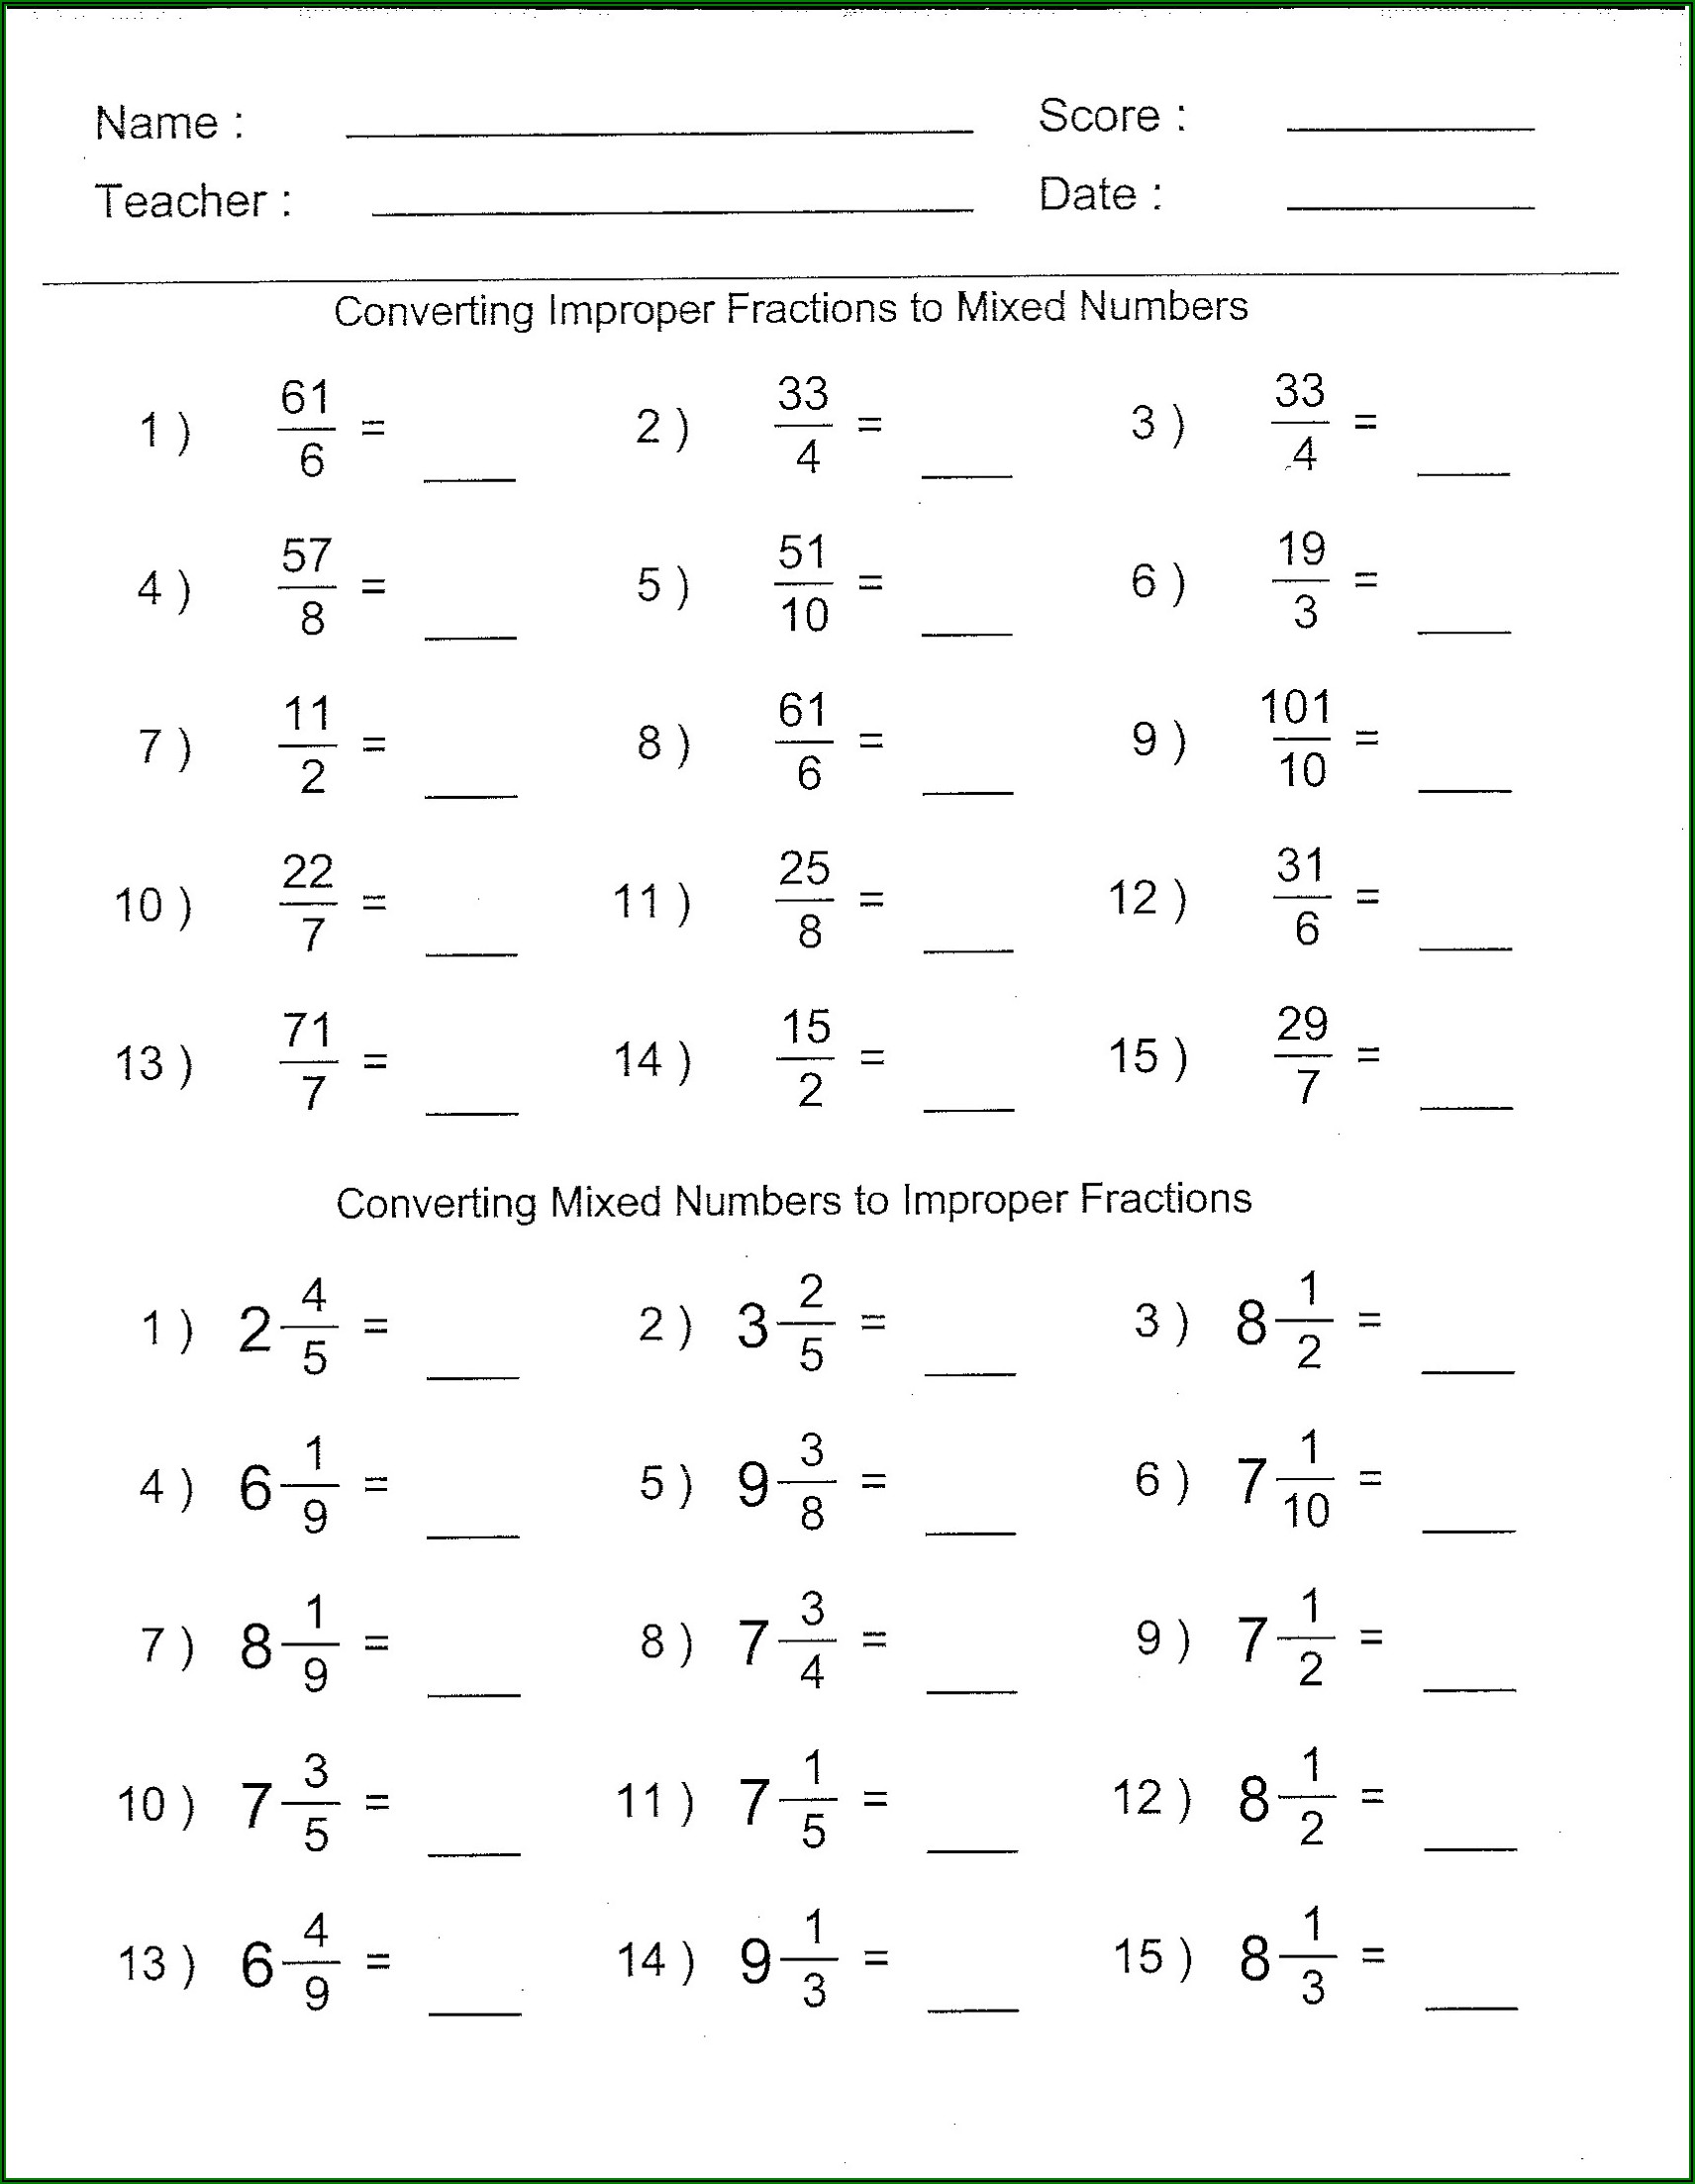 Converting Improper Fractions To Mixed Numbers Worksheet Pdf